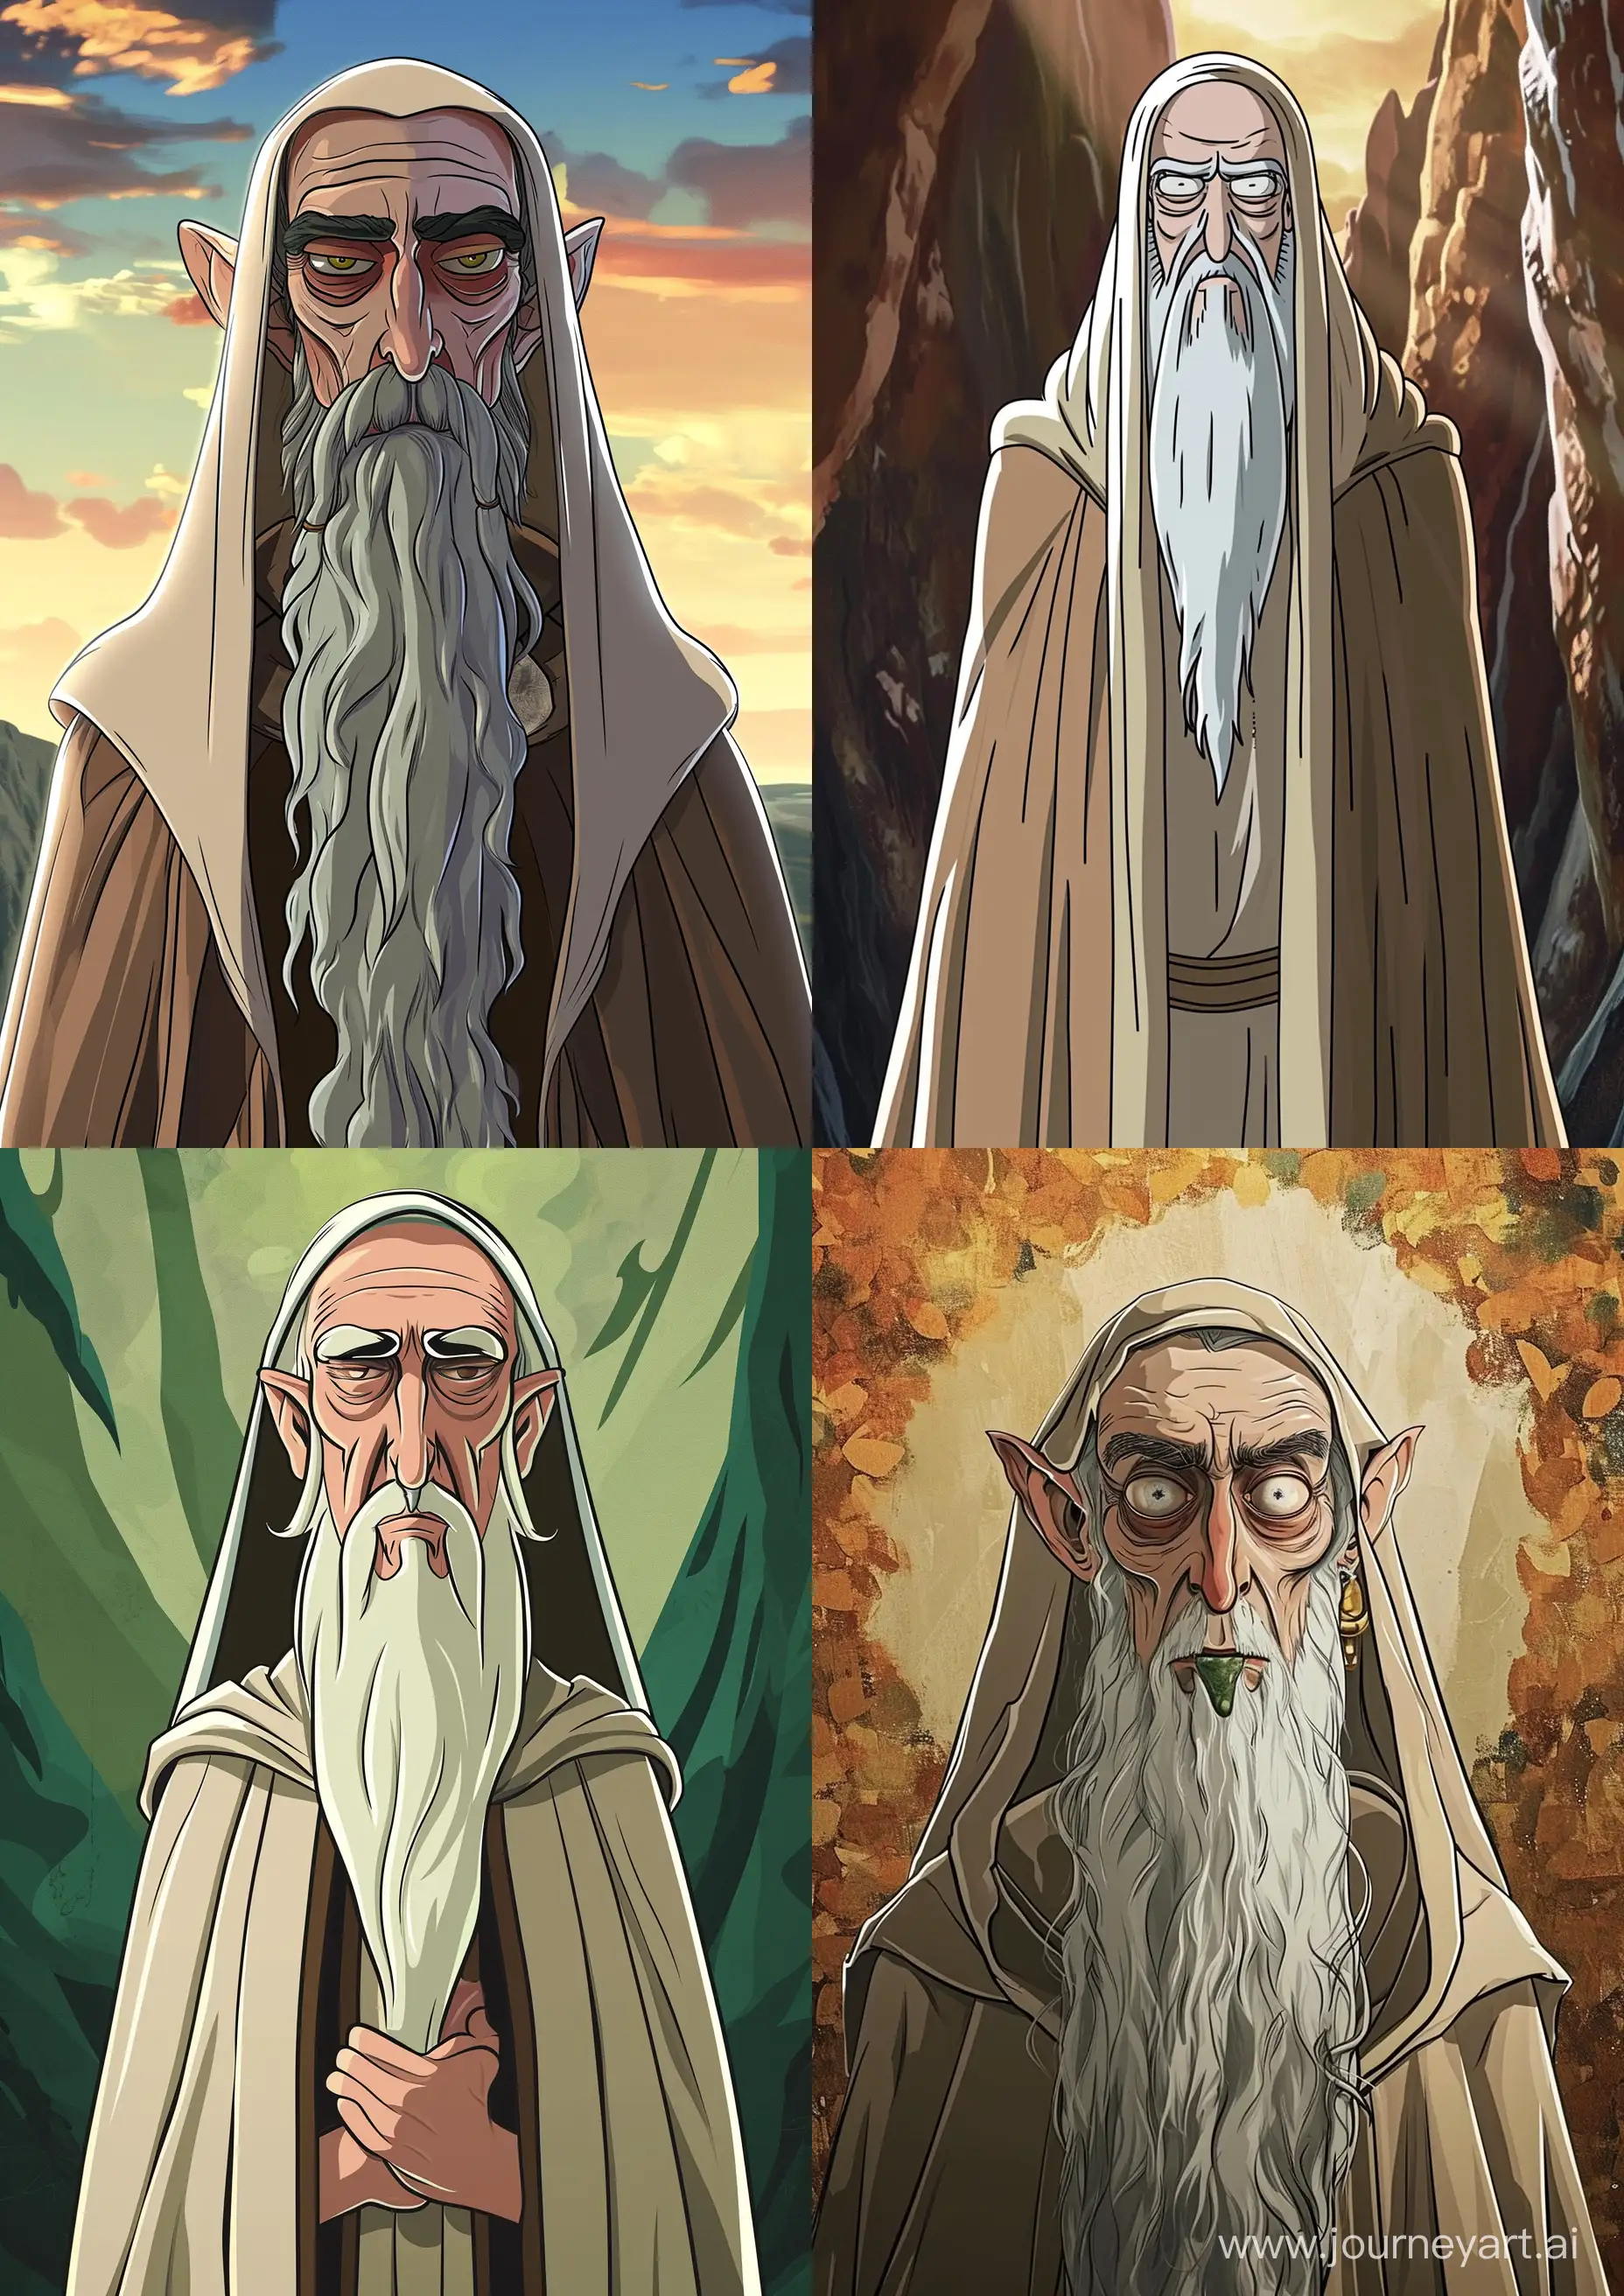 Saruman-the-Lord-of-the-Rings-in-Rick-and-Morty-Cartoon-Style